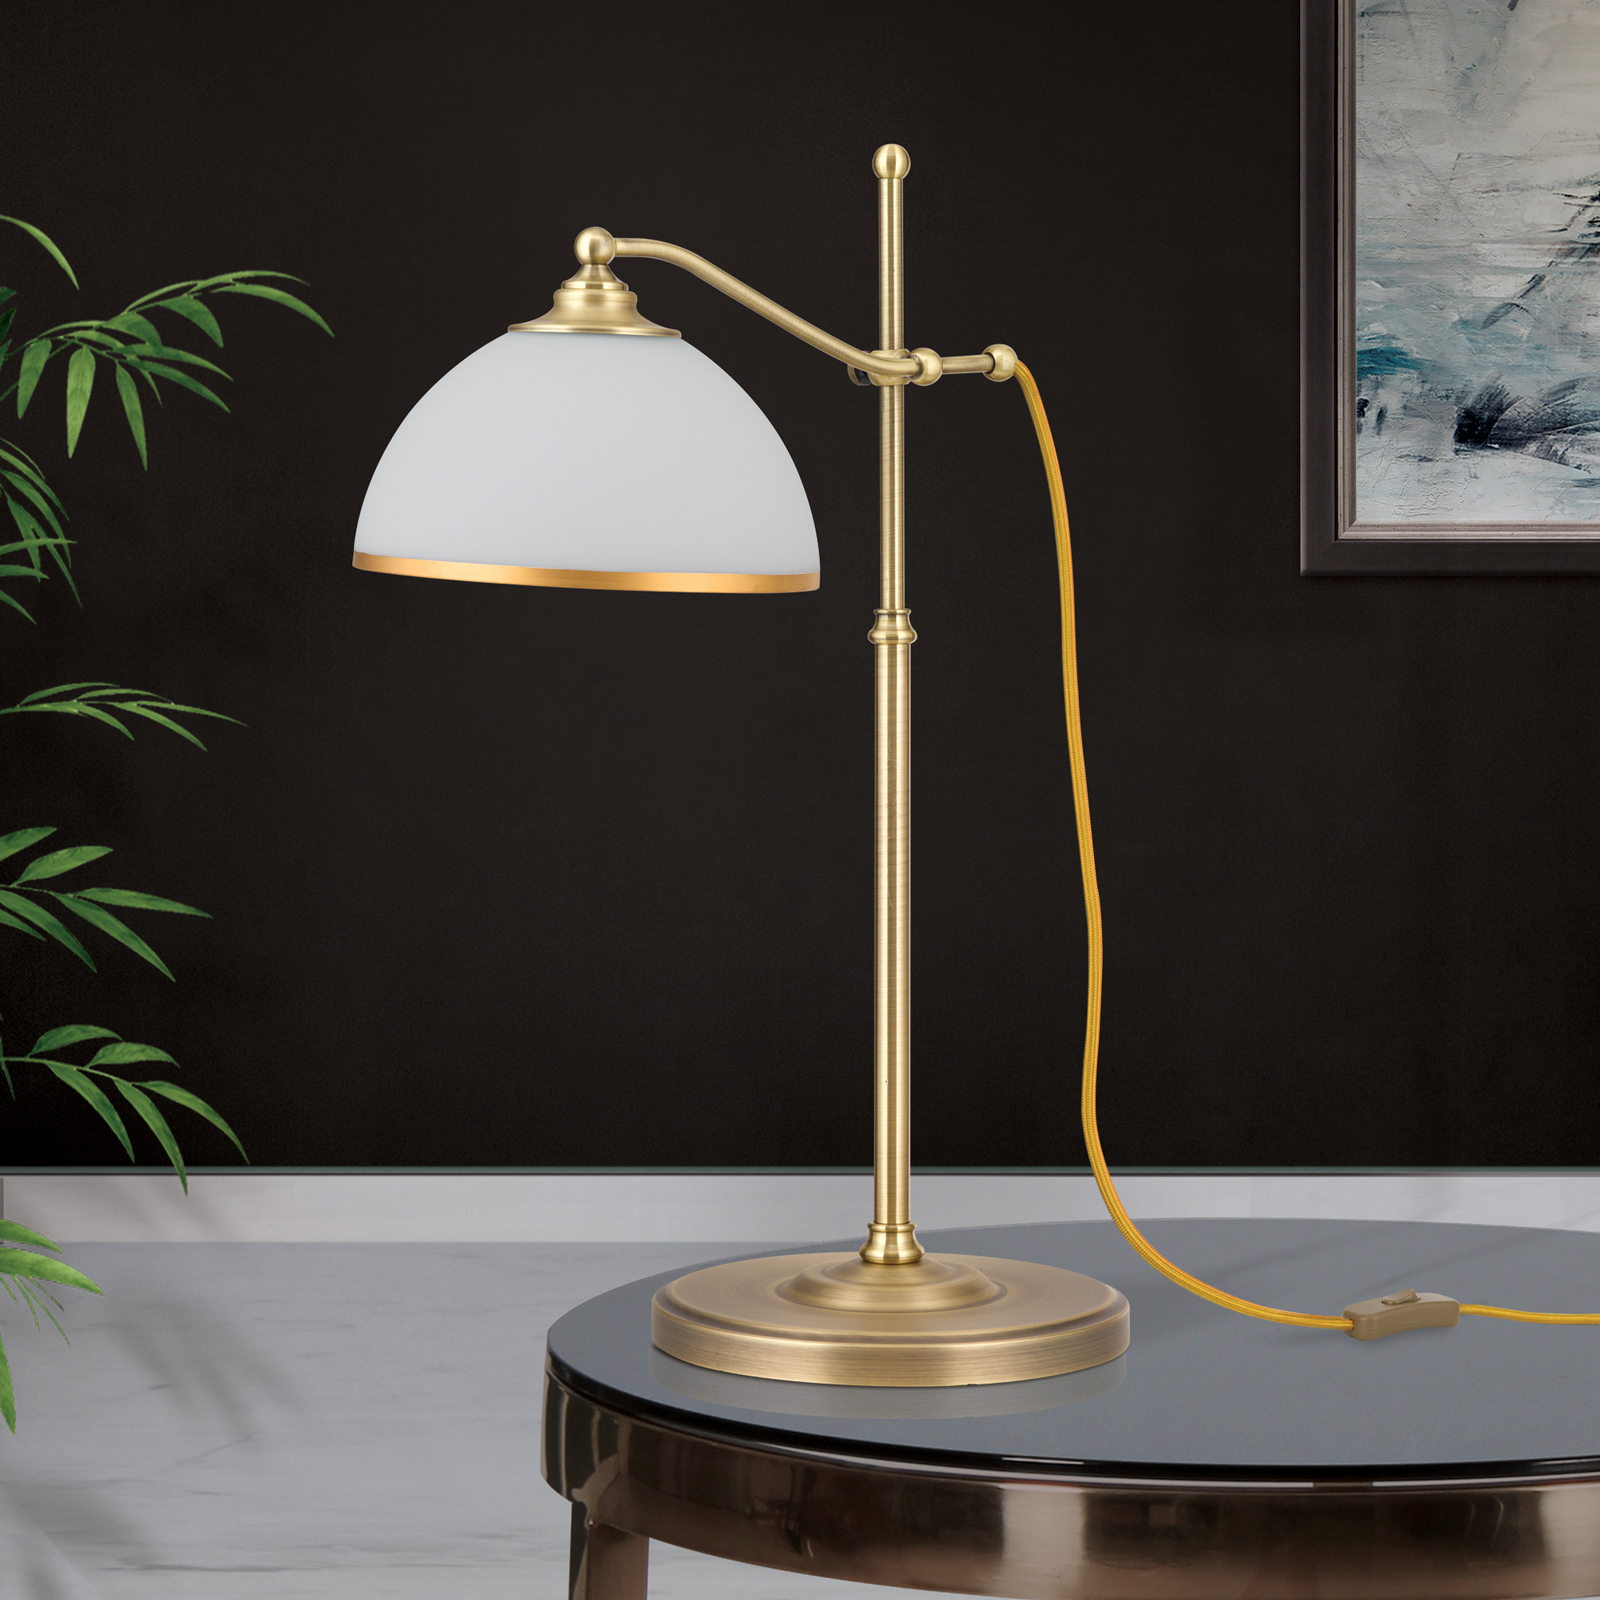 Old Lamp table lamp with a height-adjustable frame